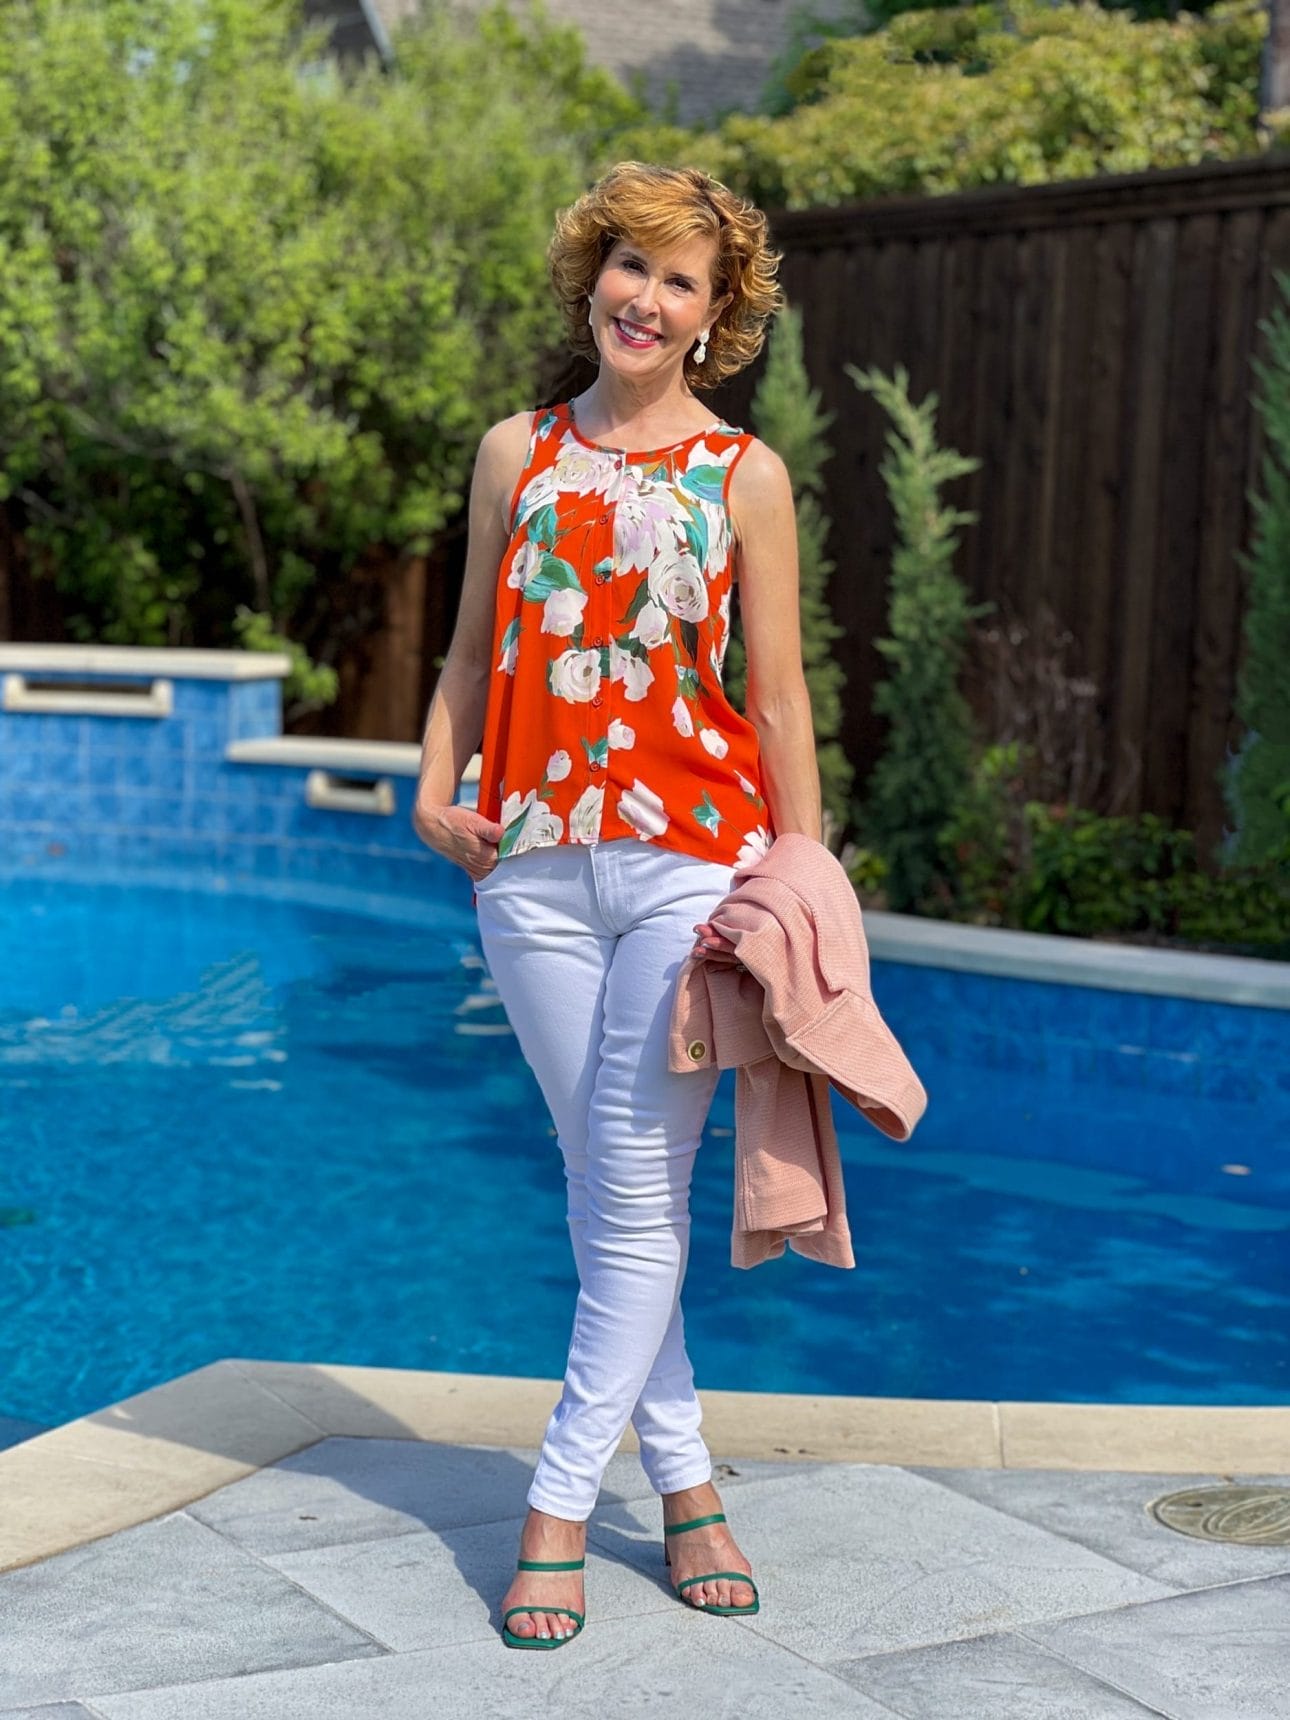 woman posing in orange floral top and white skinny jeans by pool with her legs crossed